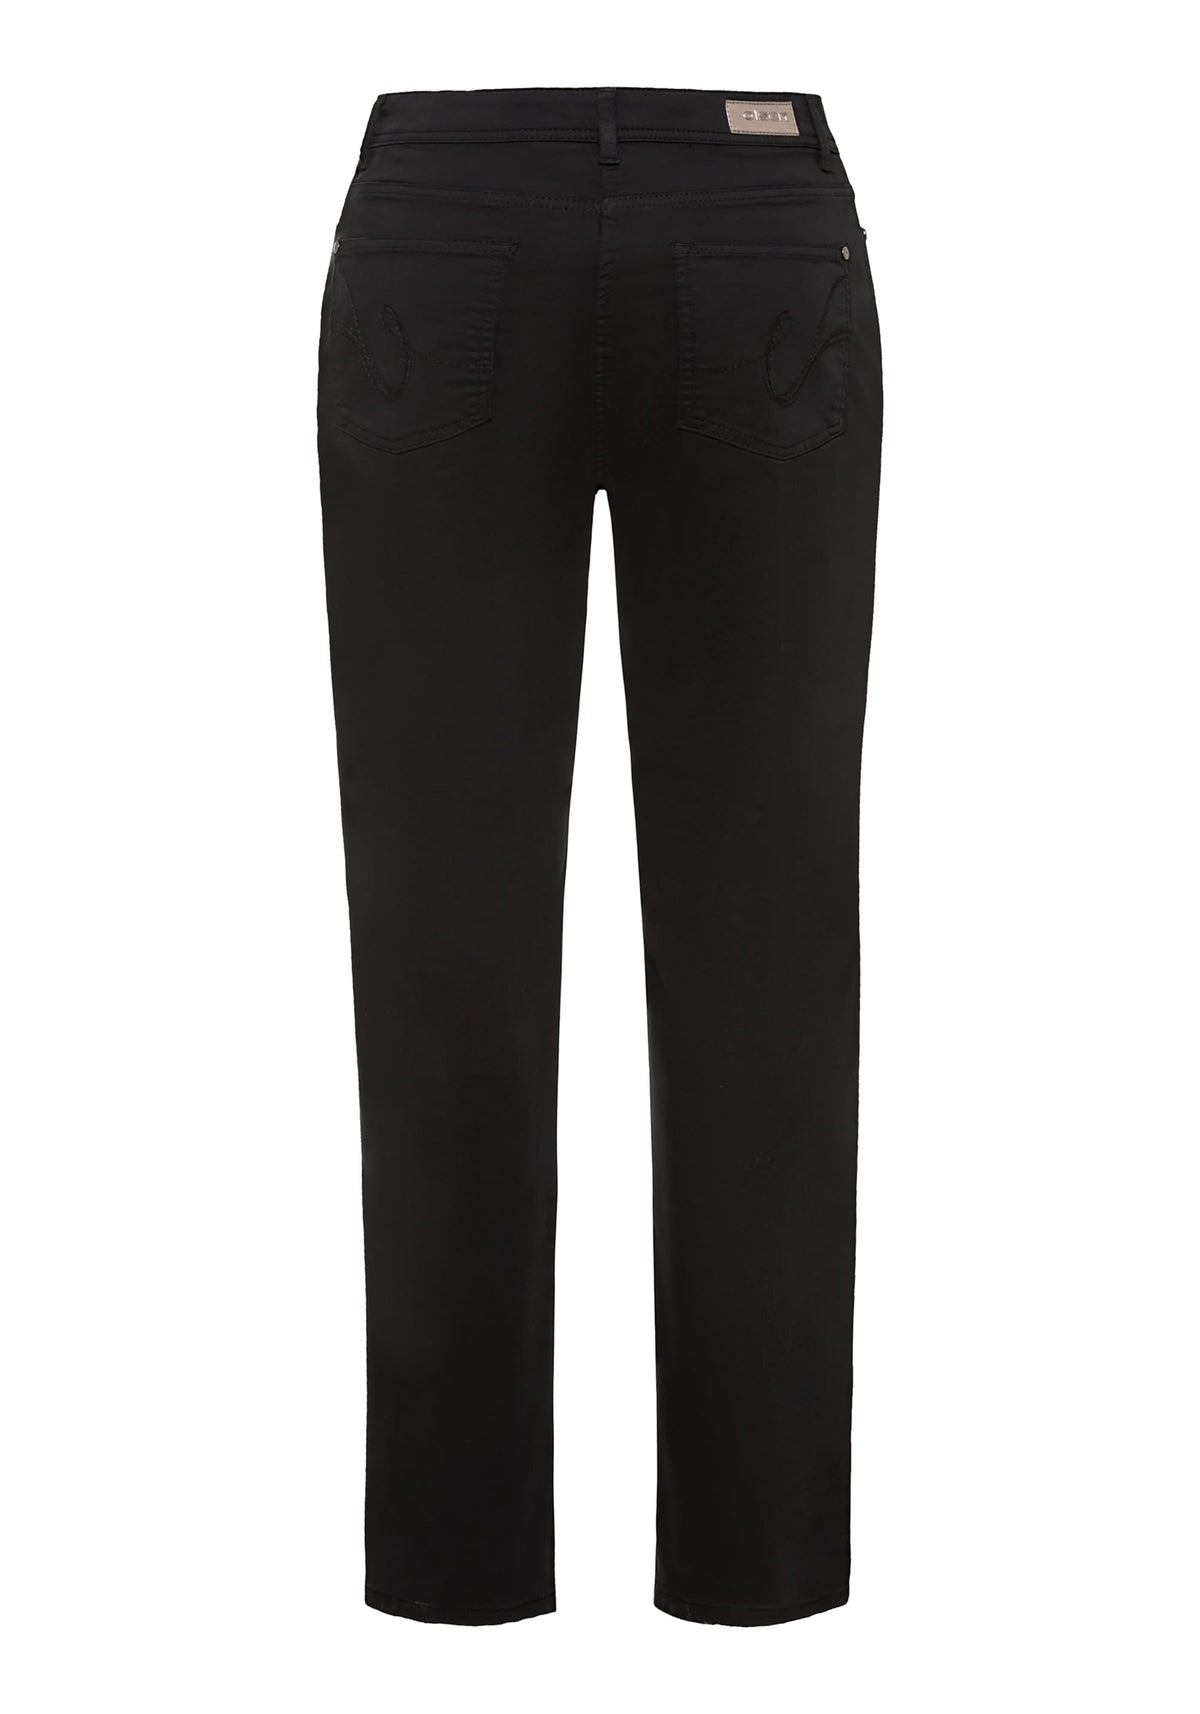 Mona Fit Straight Leg Casual Pant